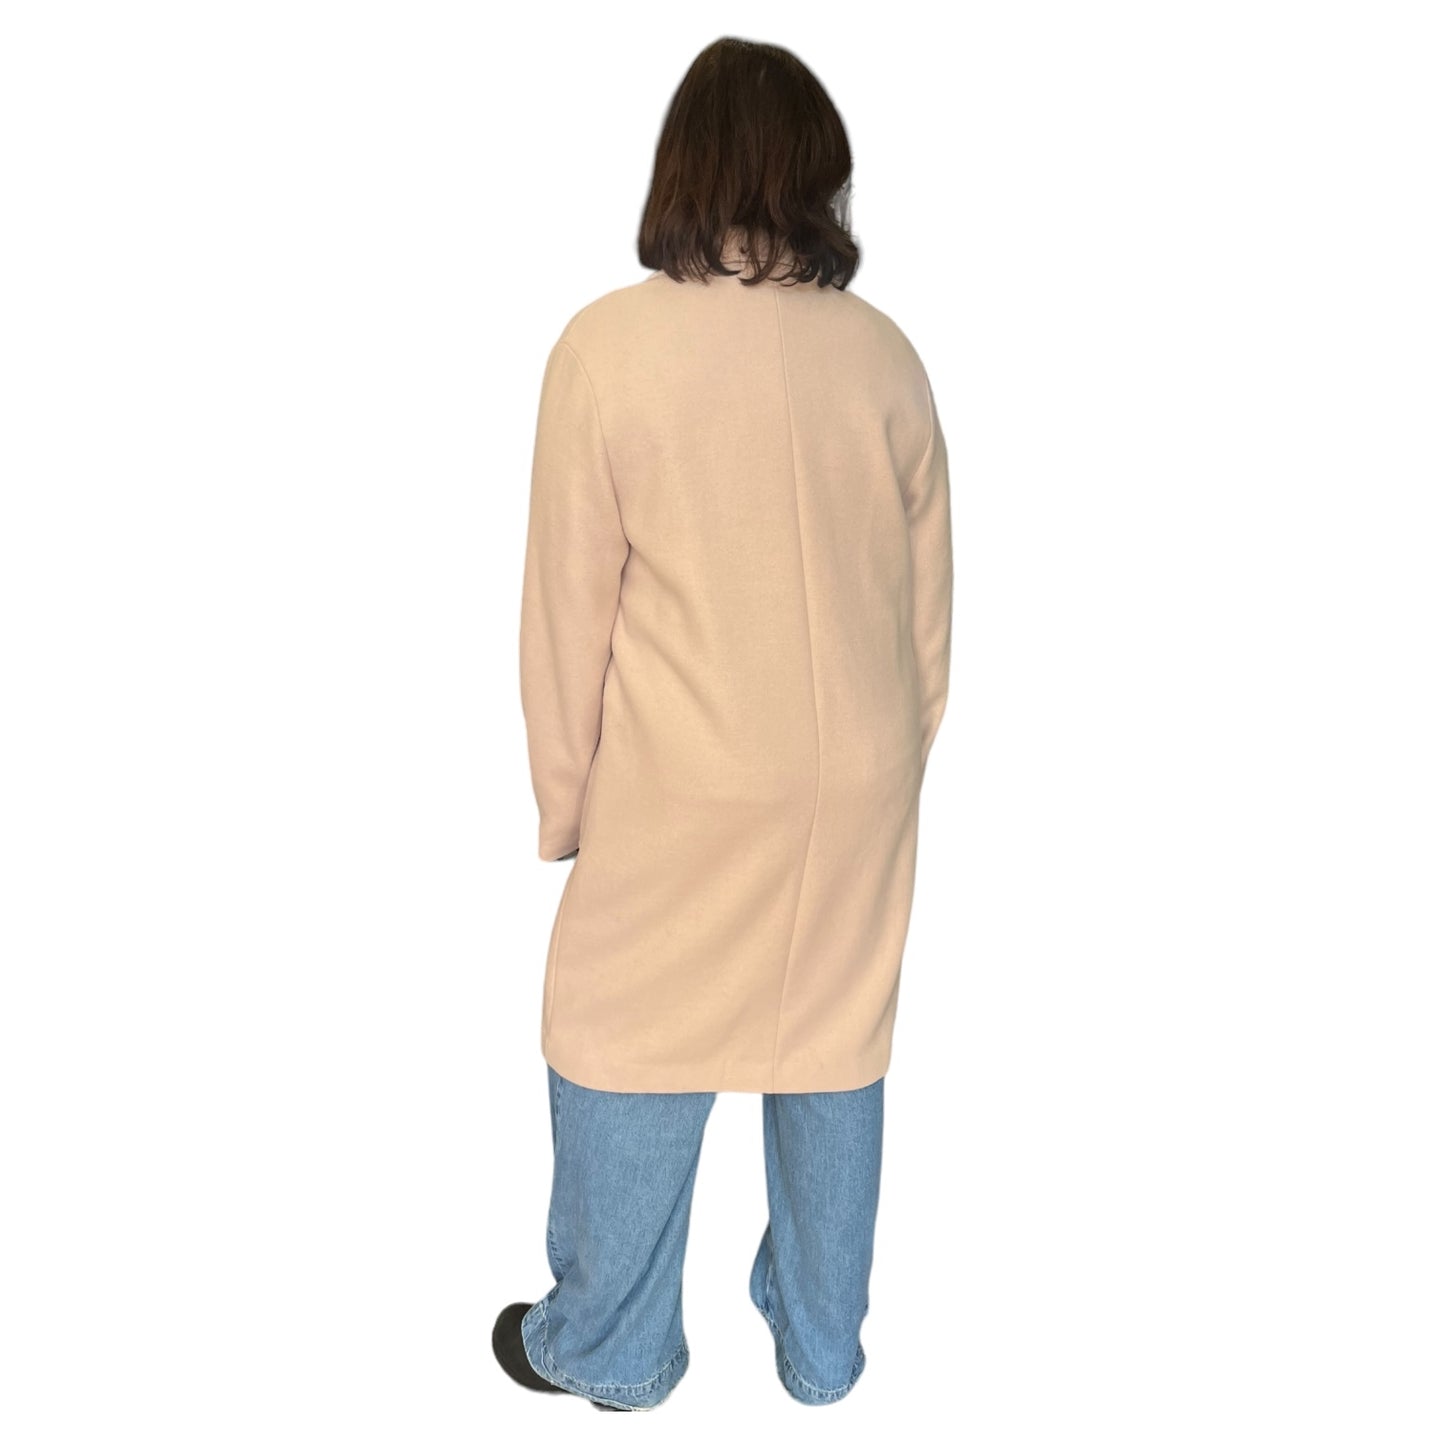 NEW Long Tall Sally Pale Pink Coat